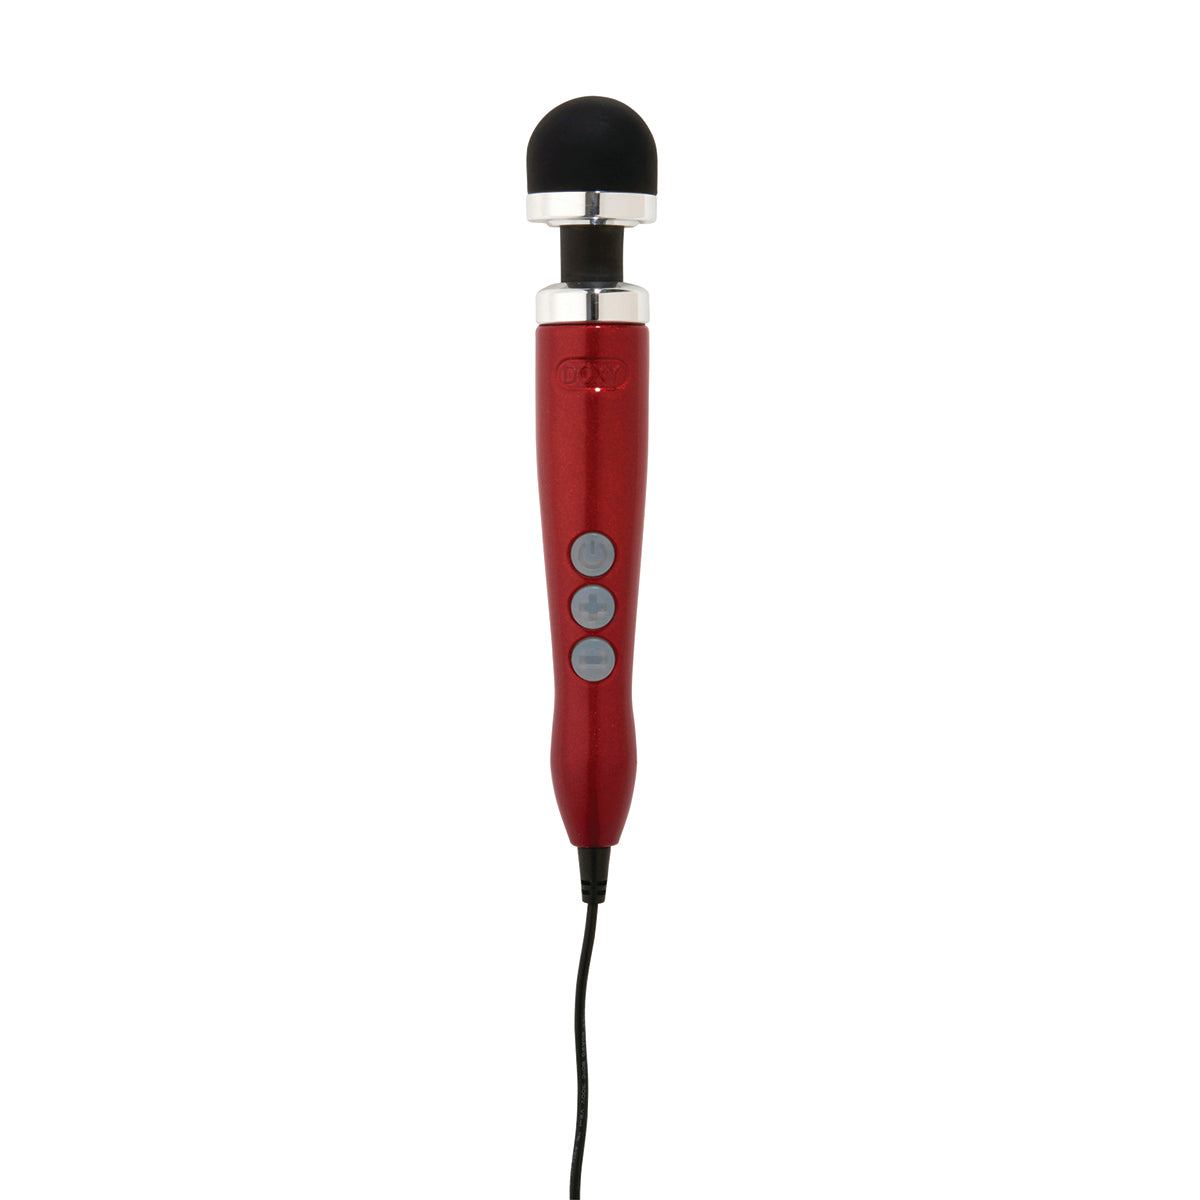 Doxy Number 3 Die Cast Aluminum Compact Rumbling Wand Massager Red